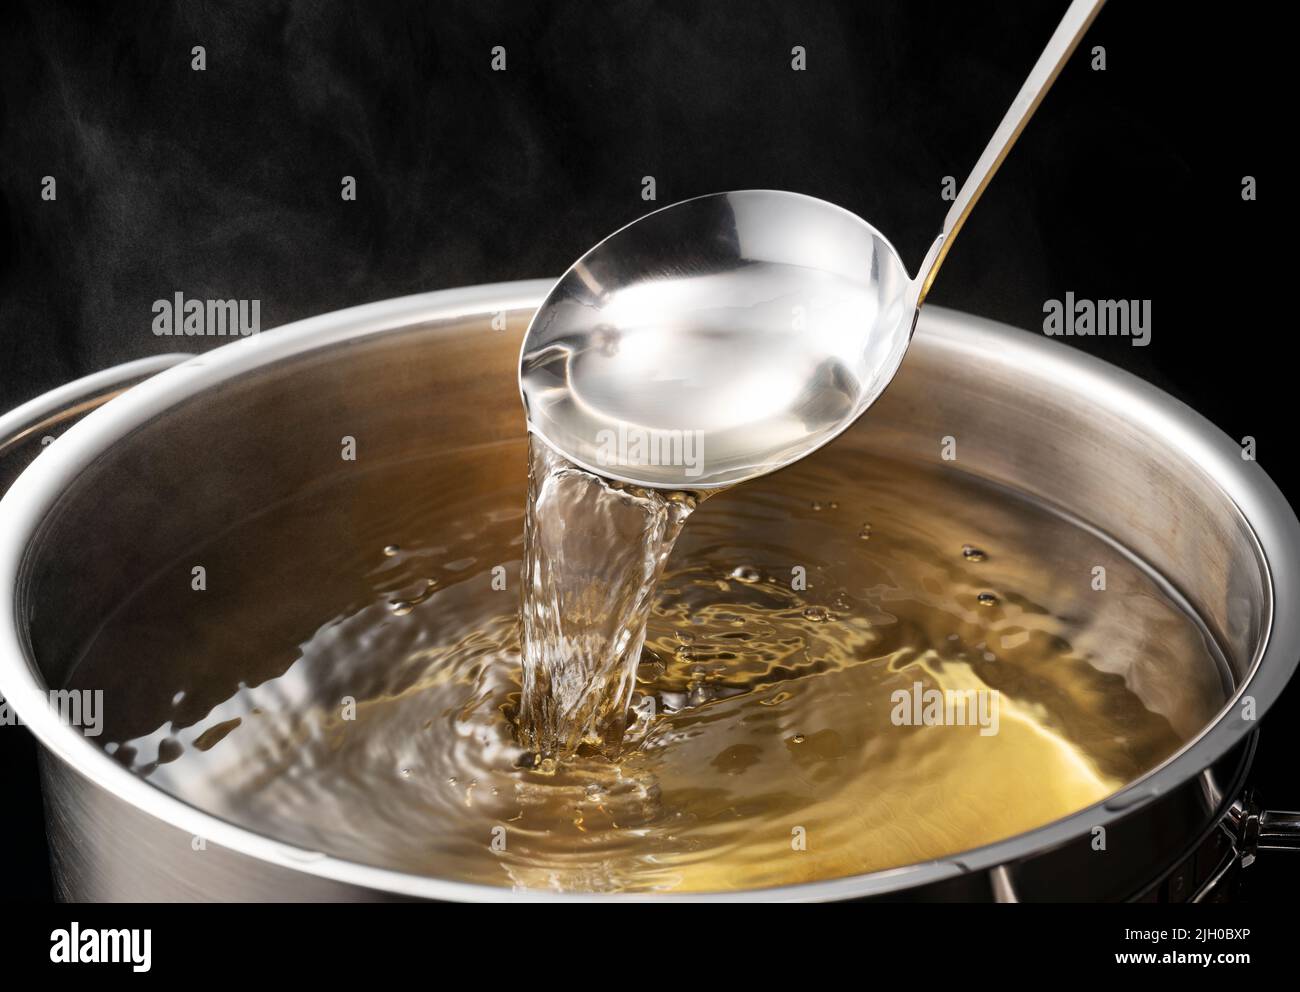 Dashi, soup stock, and the basics of Japanese cuisine. Black background. Steam. Scooping with a ladle. Stock Photo